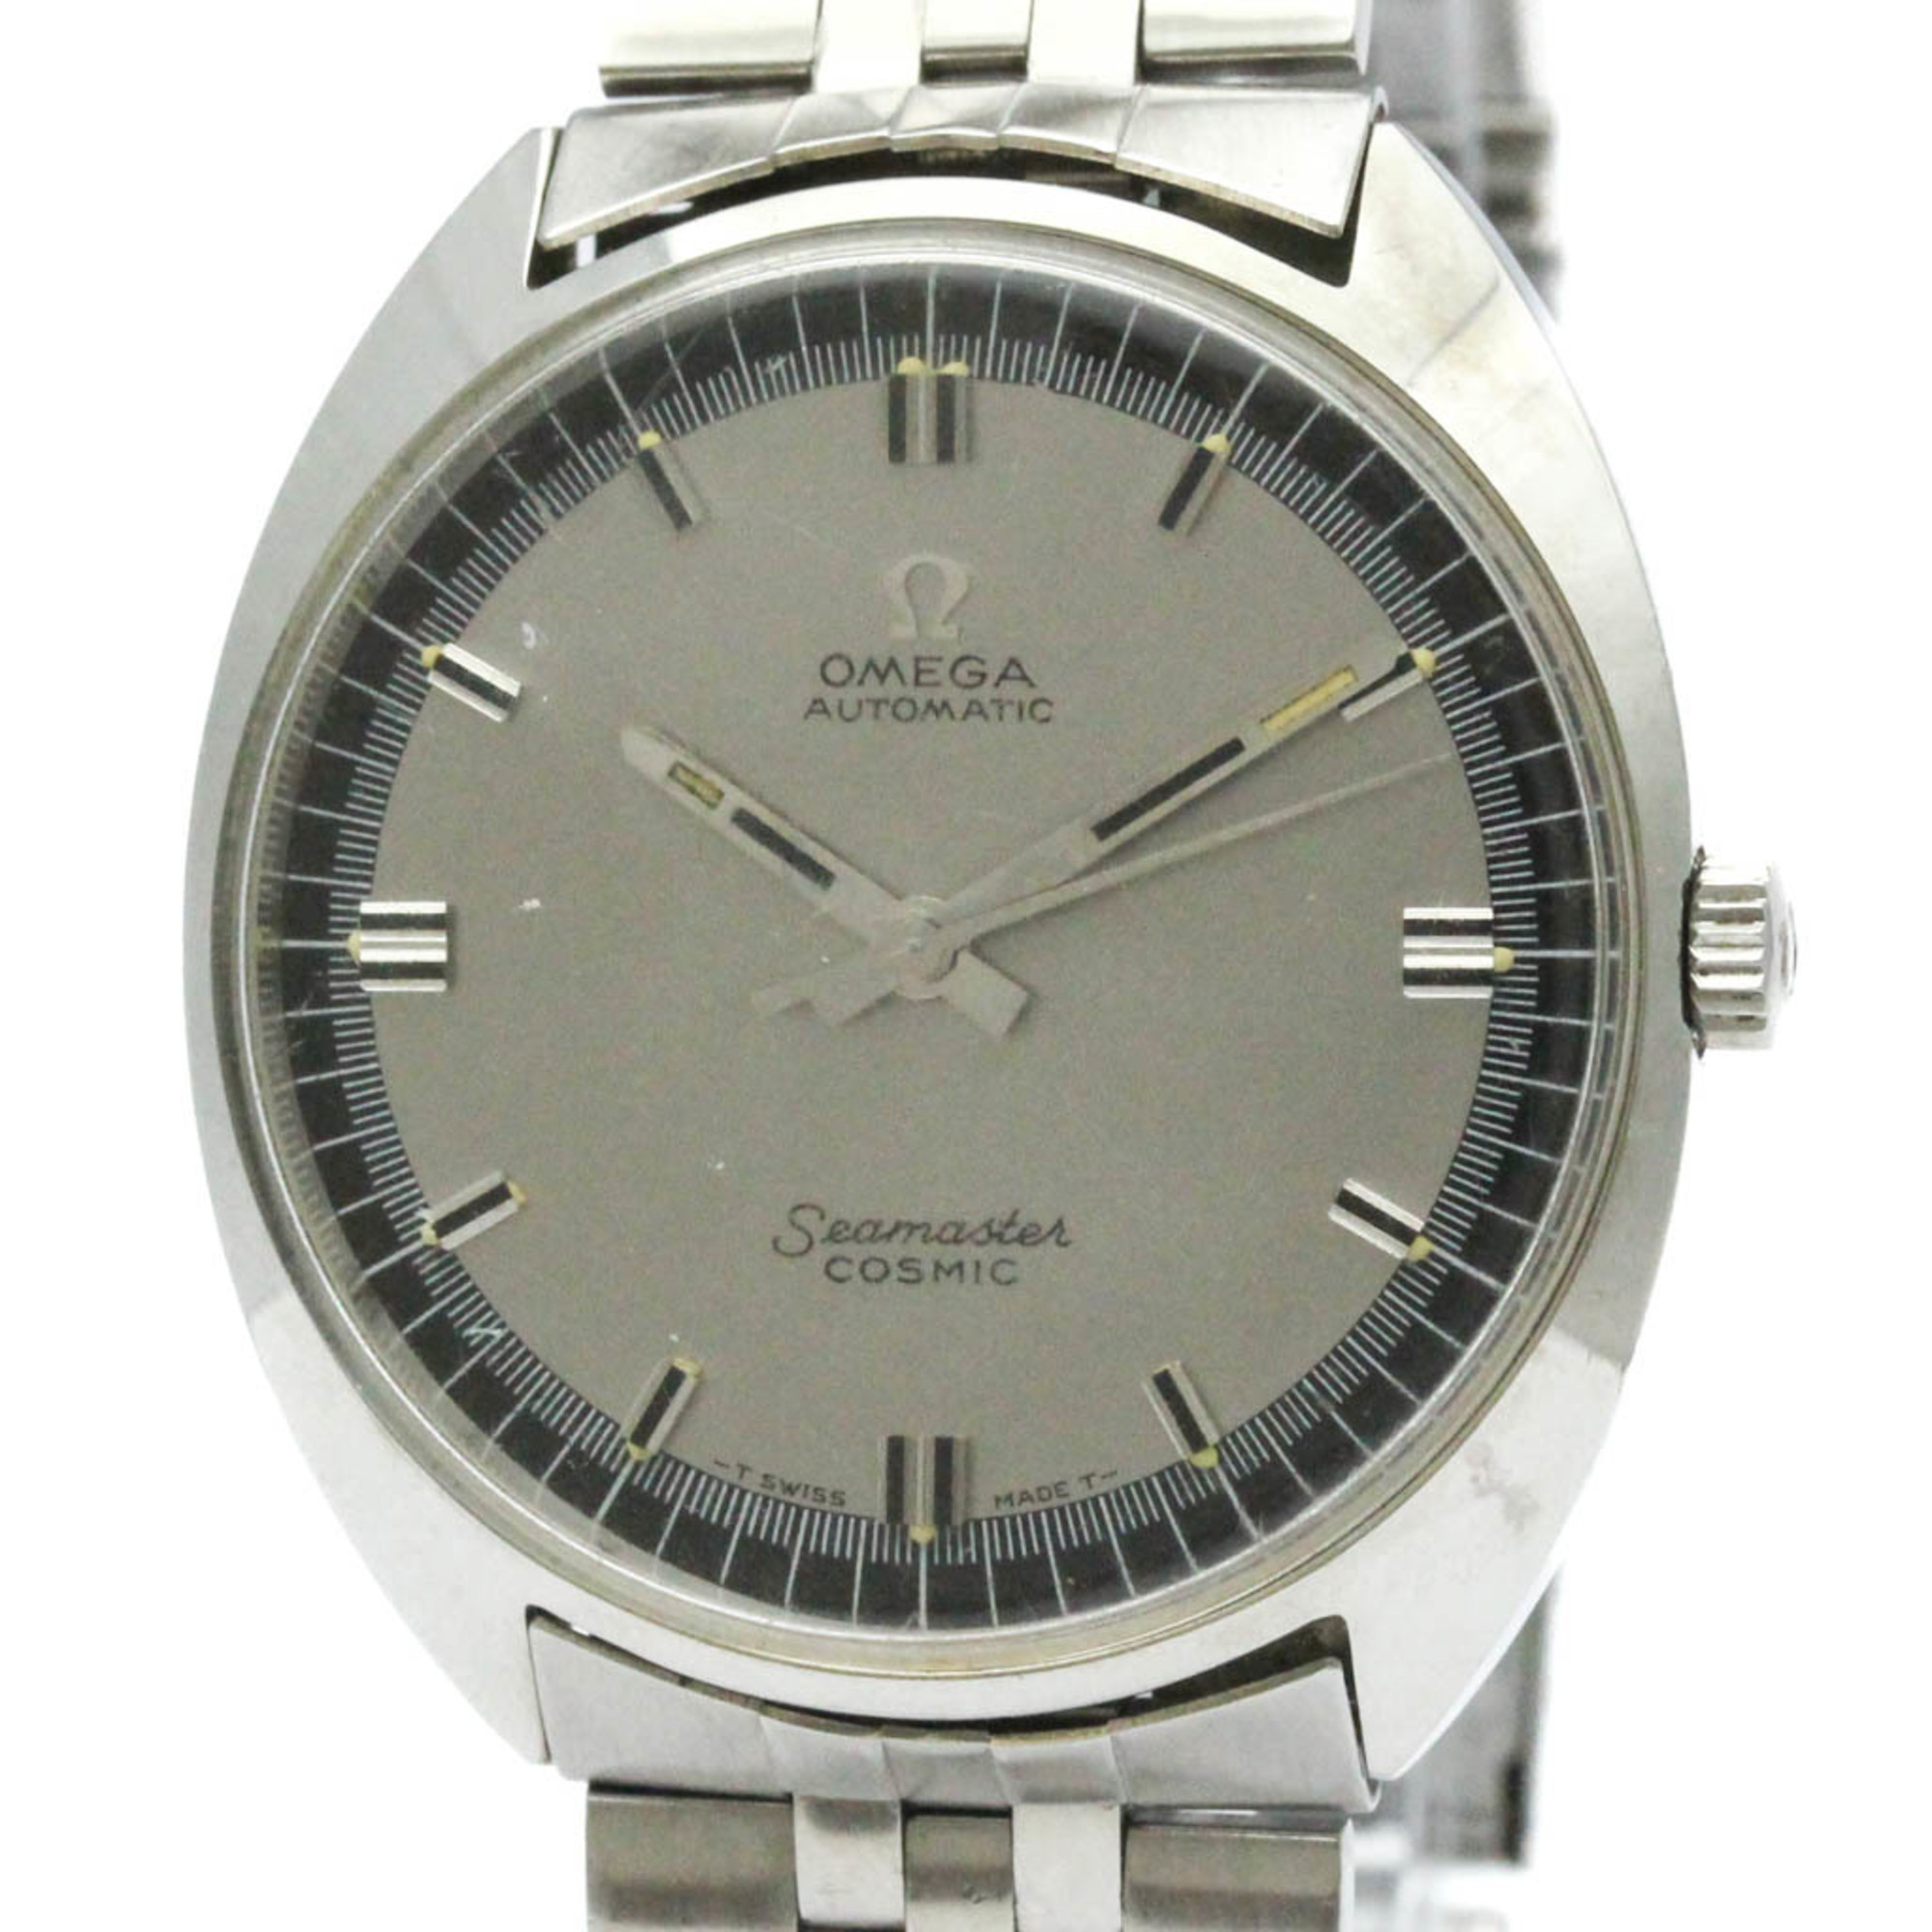 Vintage OMEGA Seamaster Cosmic Cal 552 Steel Automatic Watch 165.026 BF571258